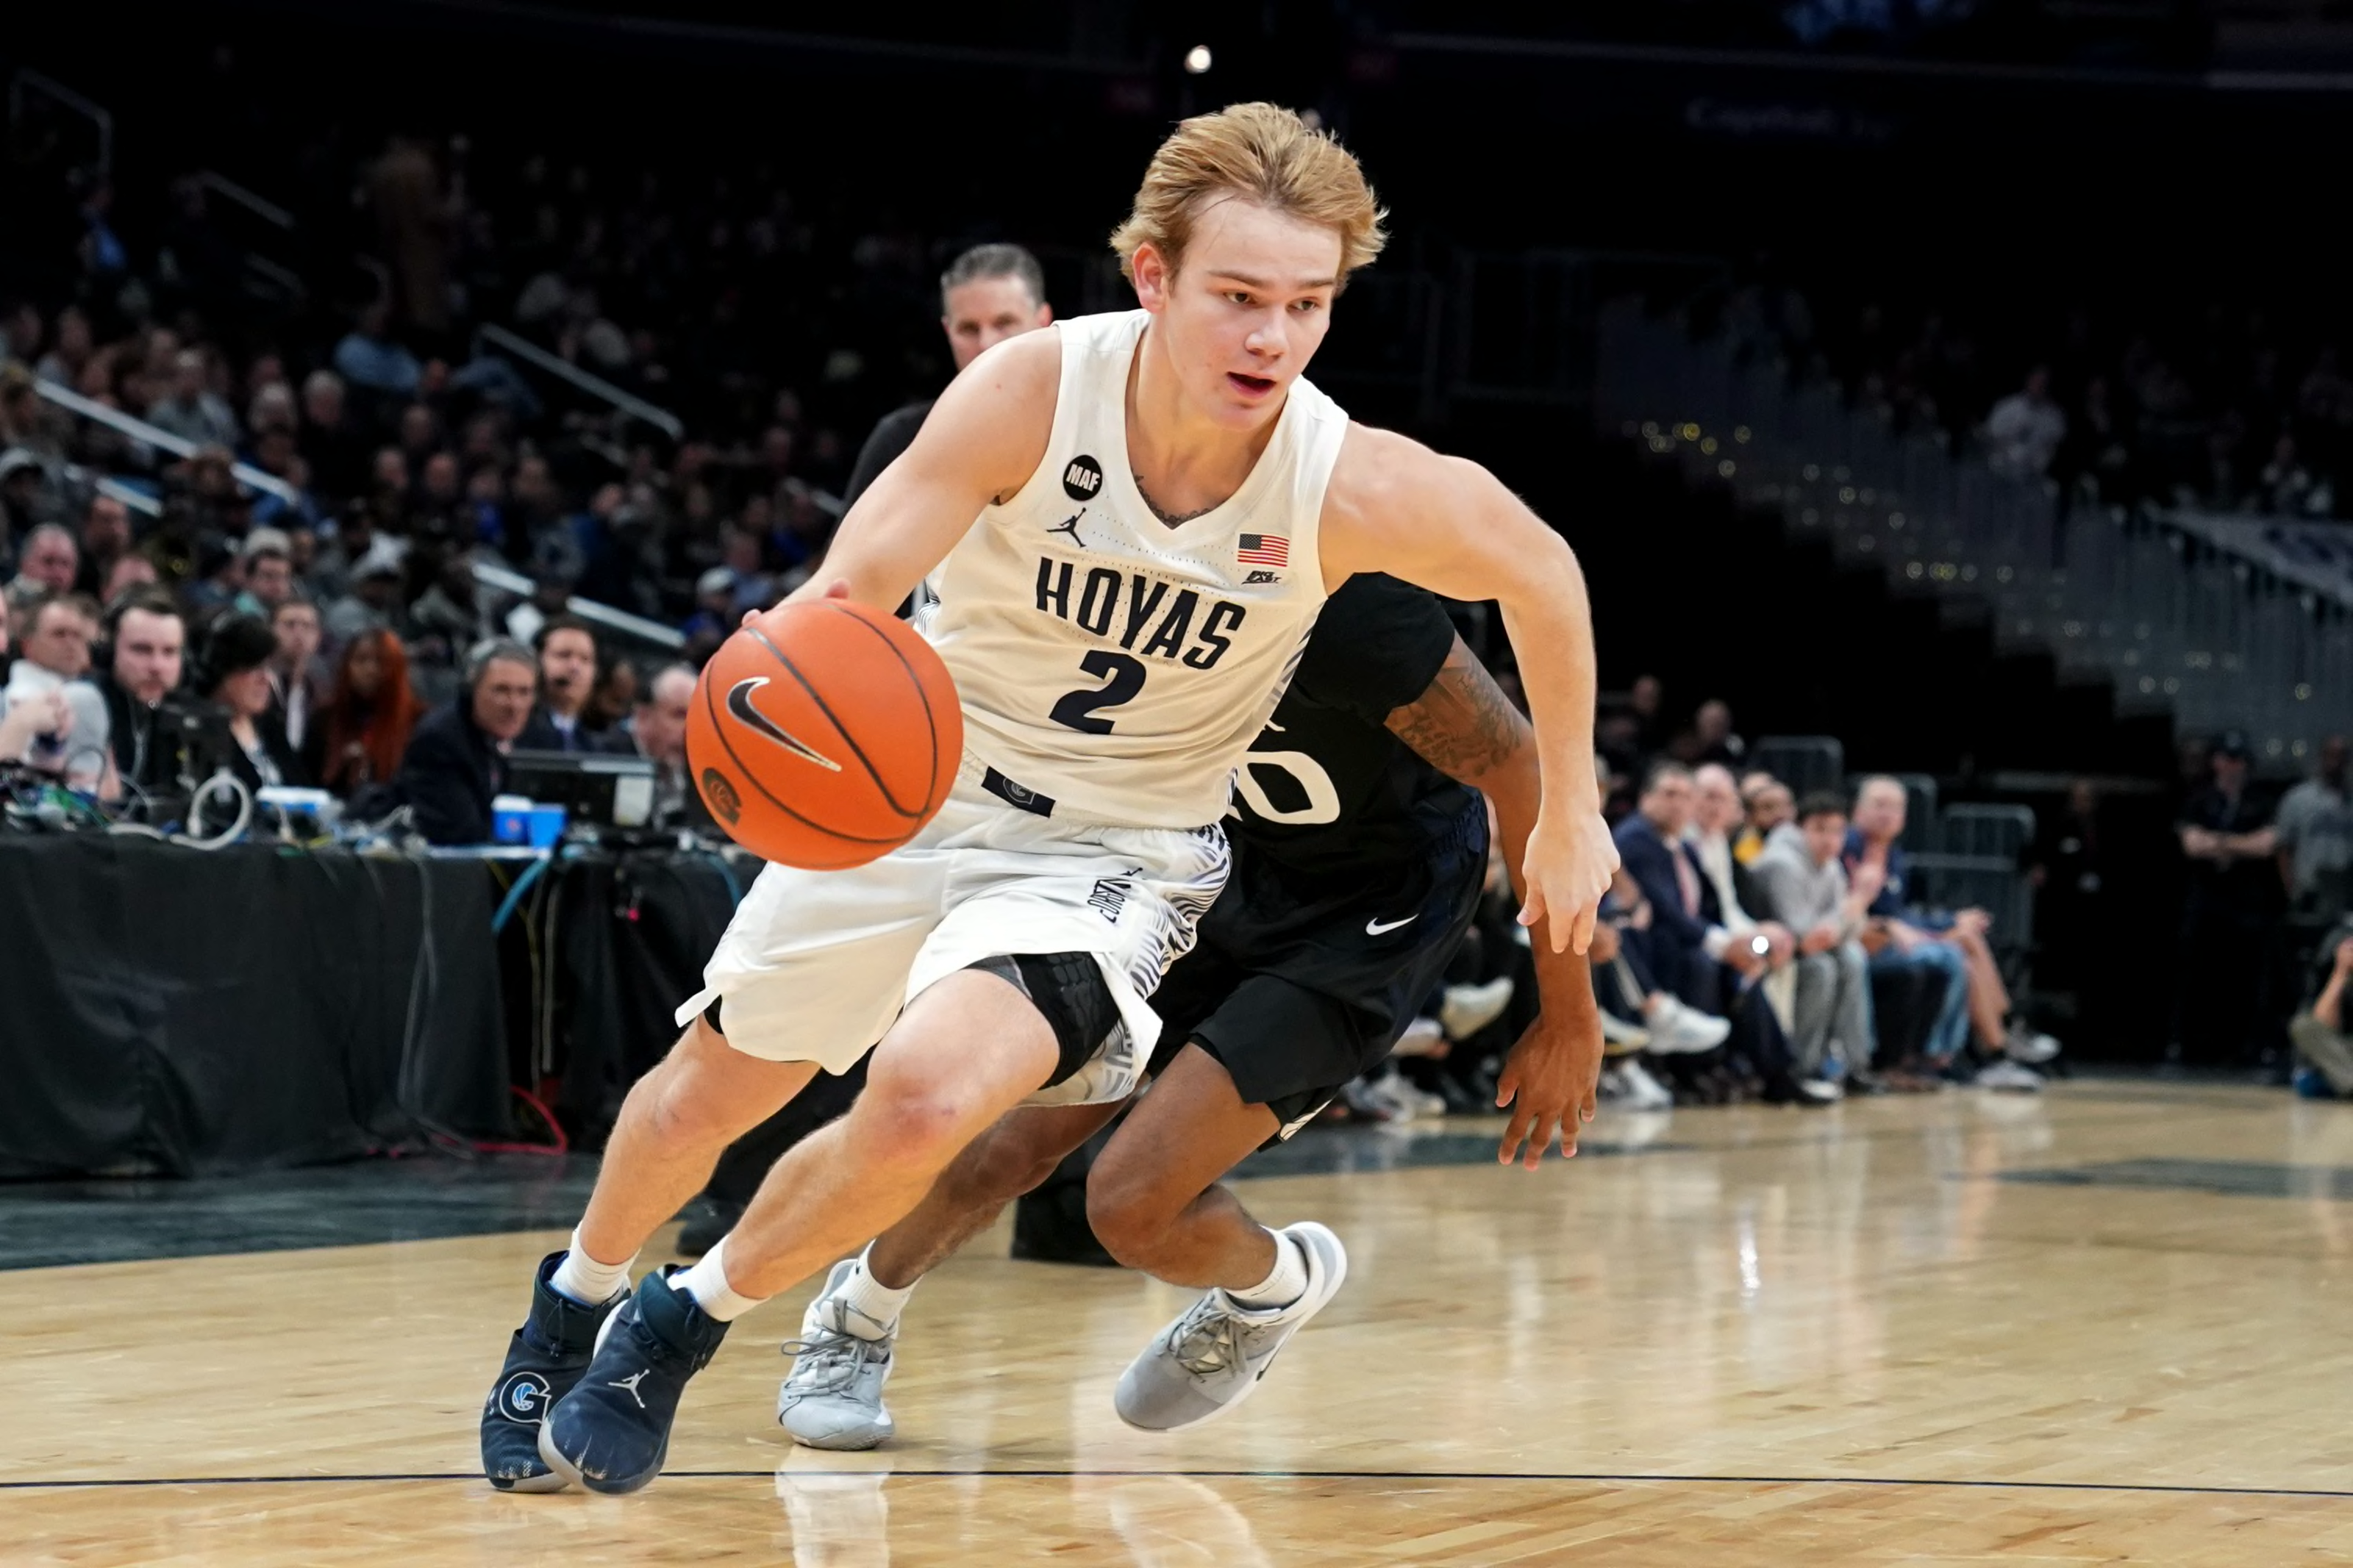 Amid NBA Draft uncertainty, prospect Mac McClung has one goal in mind